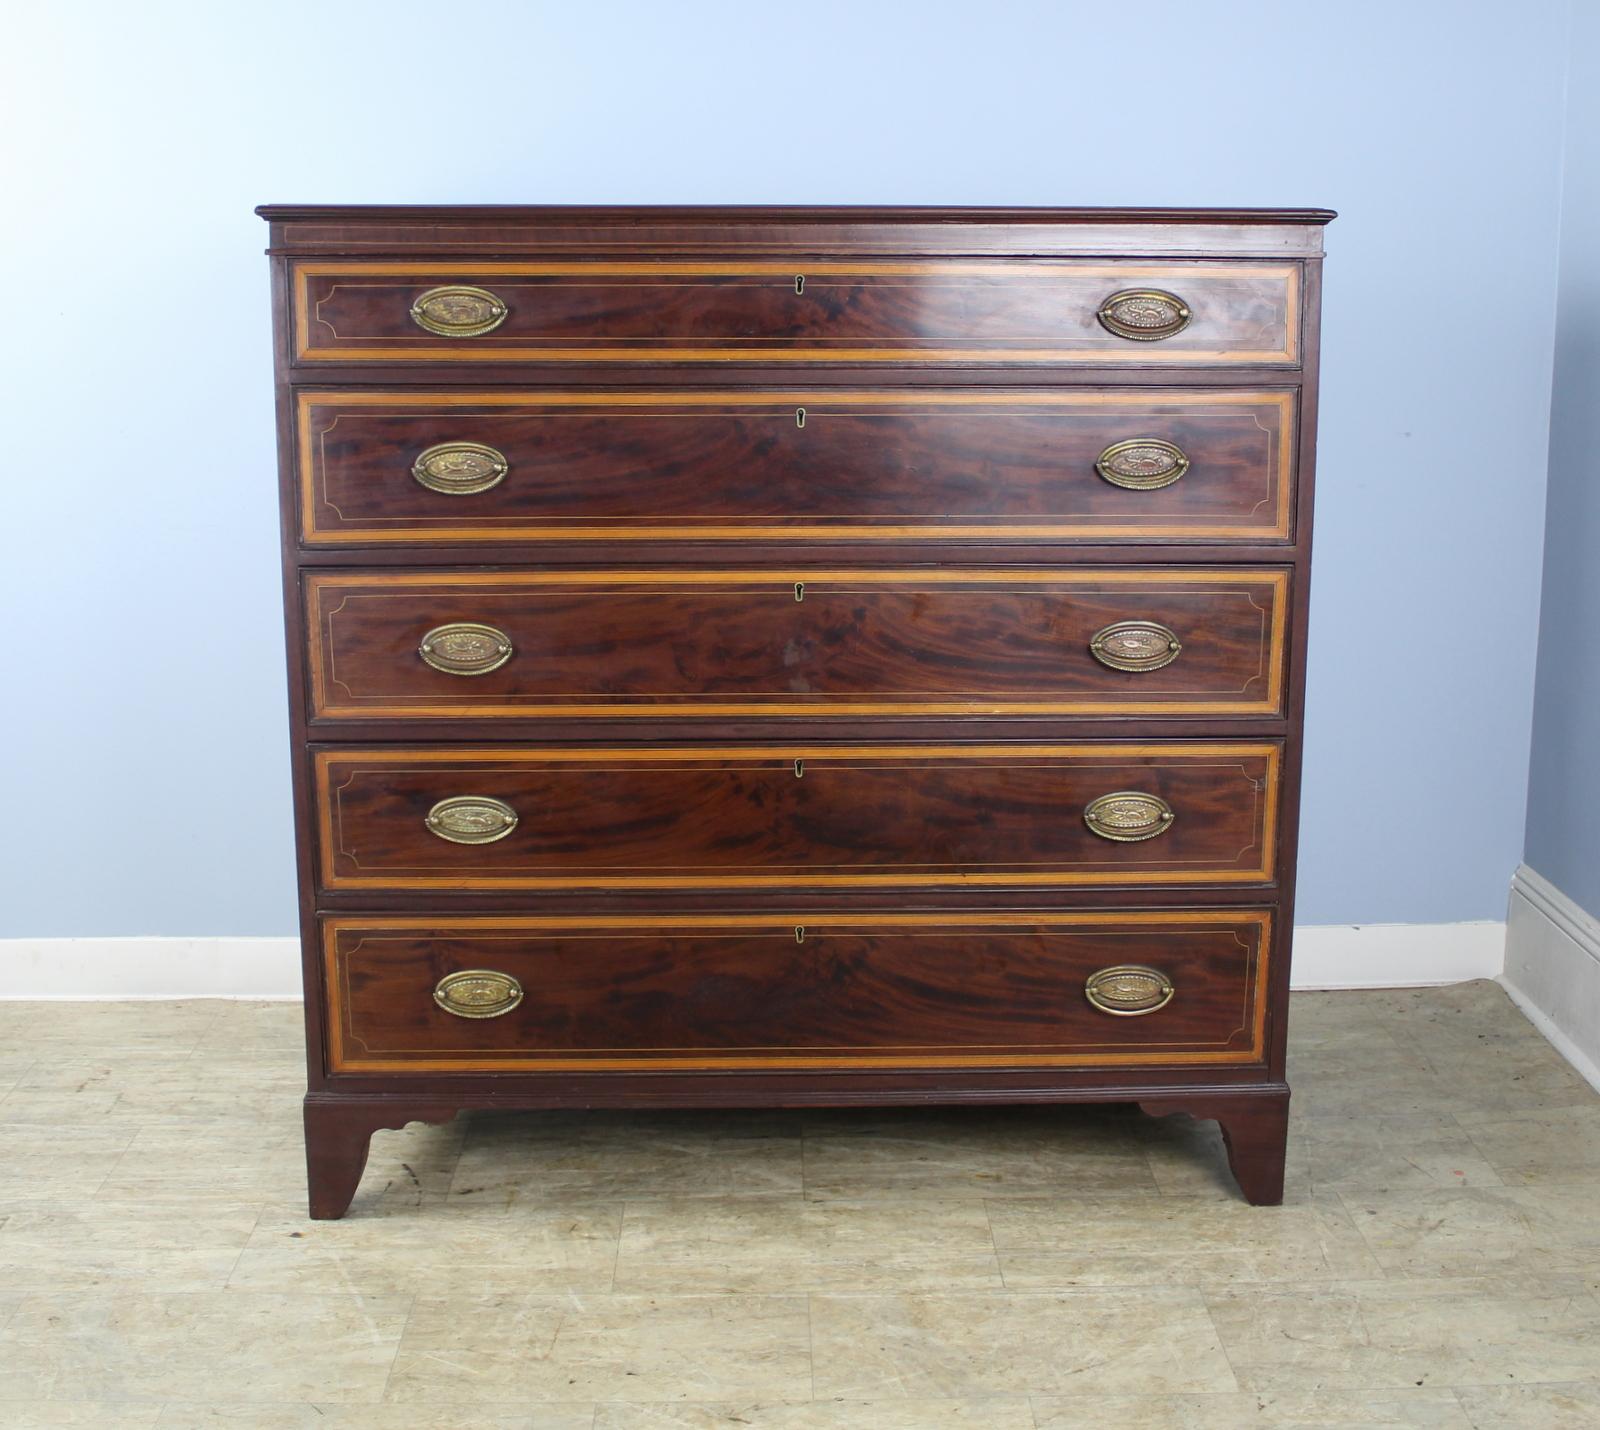 A handsome, imposing and quite early large gentlemen's dresser. Five wide drawers open and close nicely. Beautifully grained veneered mahogany drawer fronts with inlaid satinwood edging and stringing. Brass handles appear to be replaced. Good